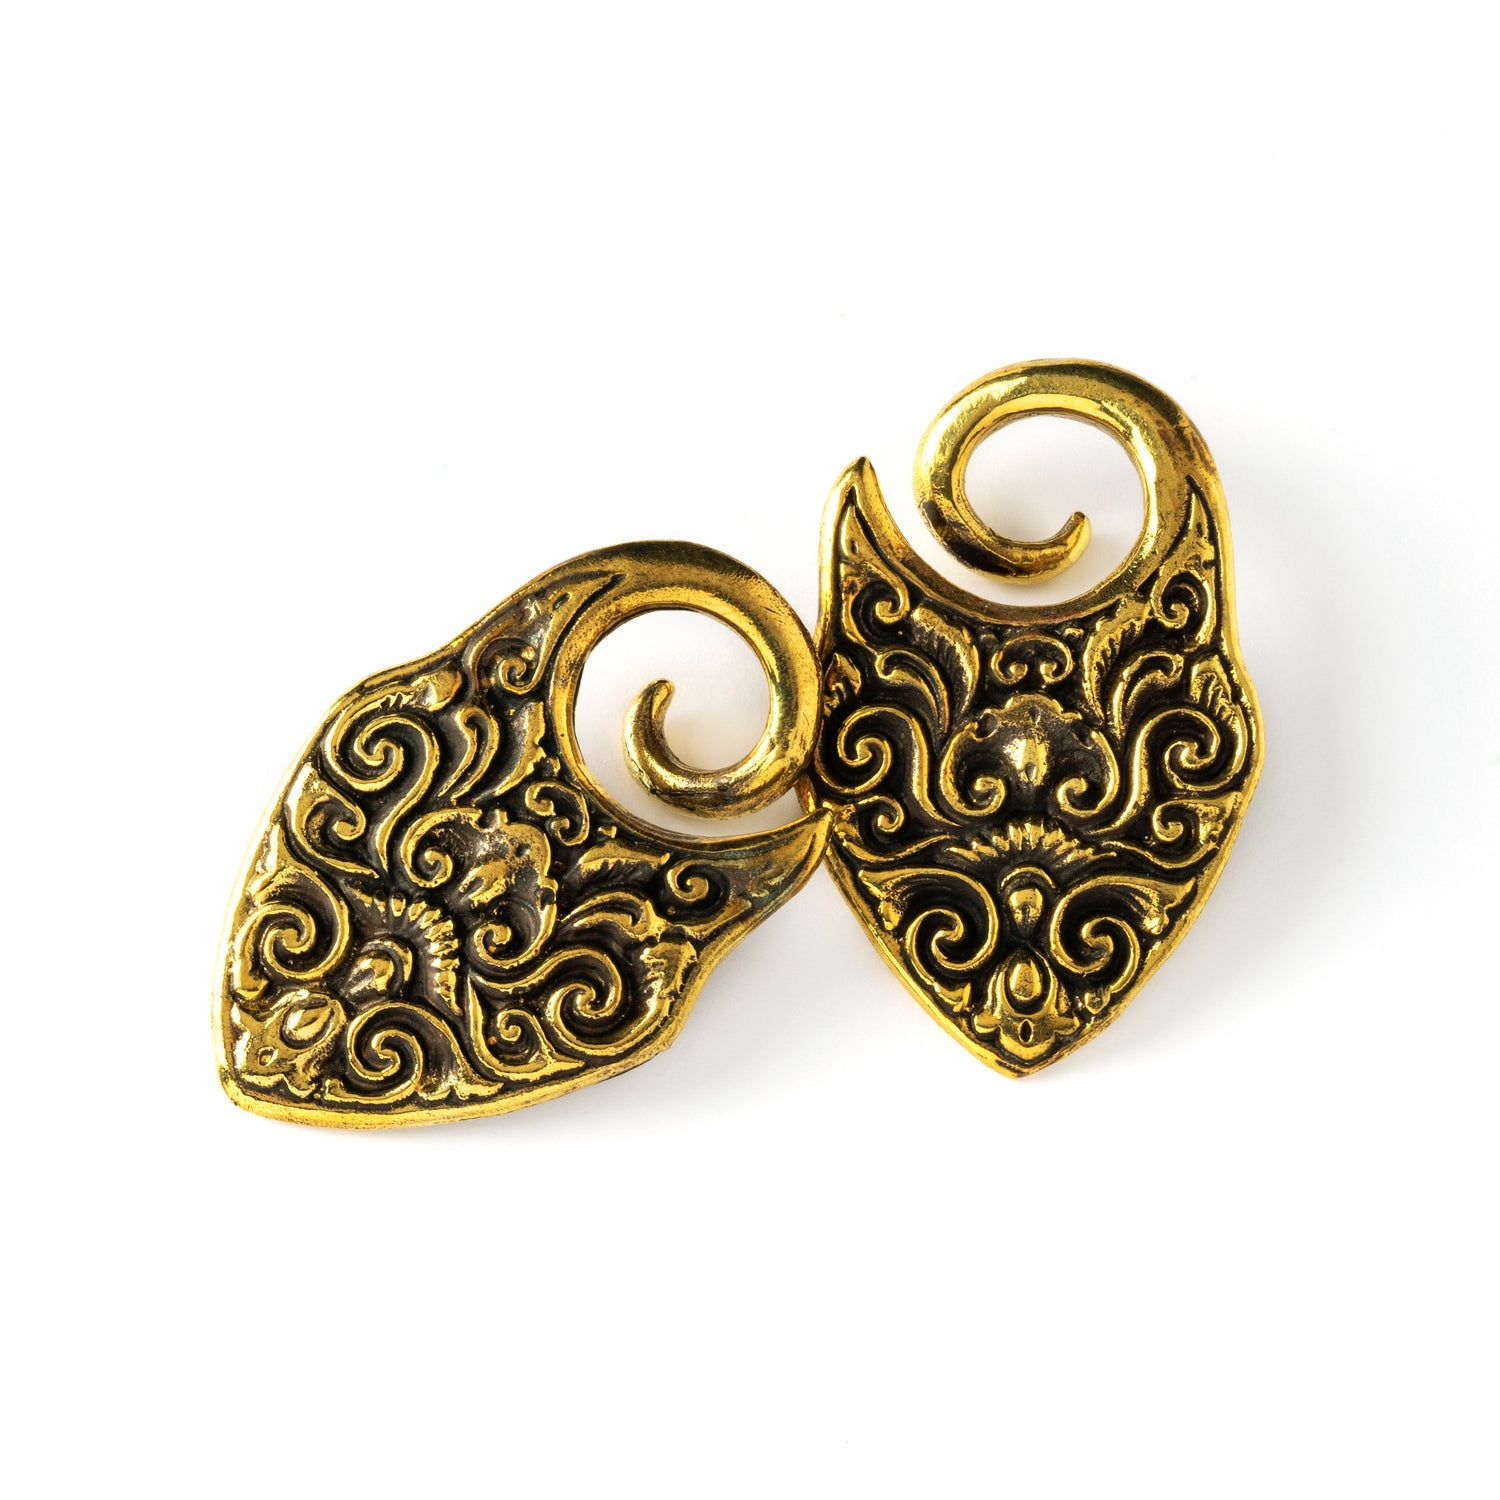 golden ear weights hangers with victorian floral ornaments frontal view